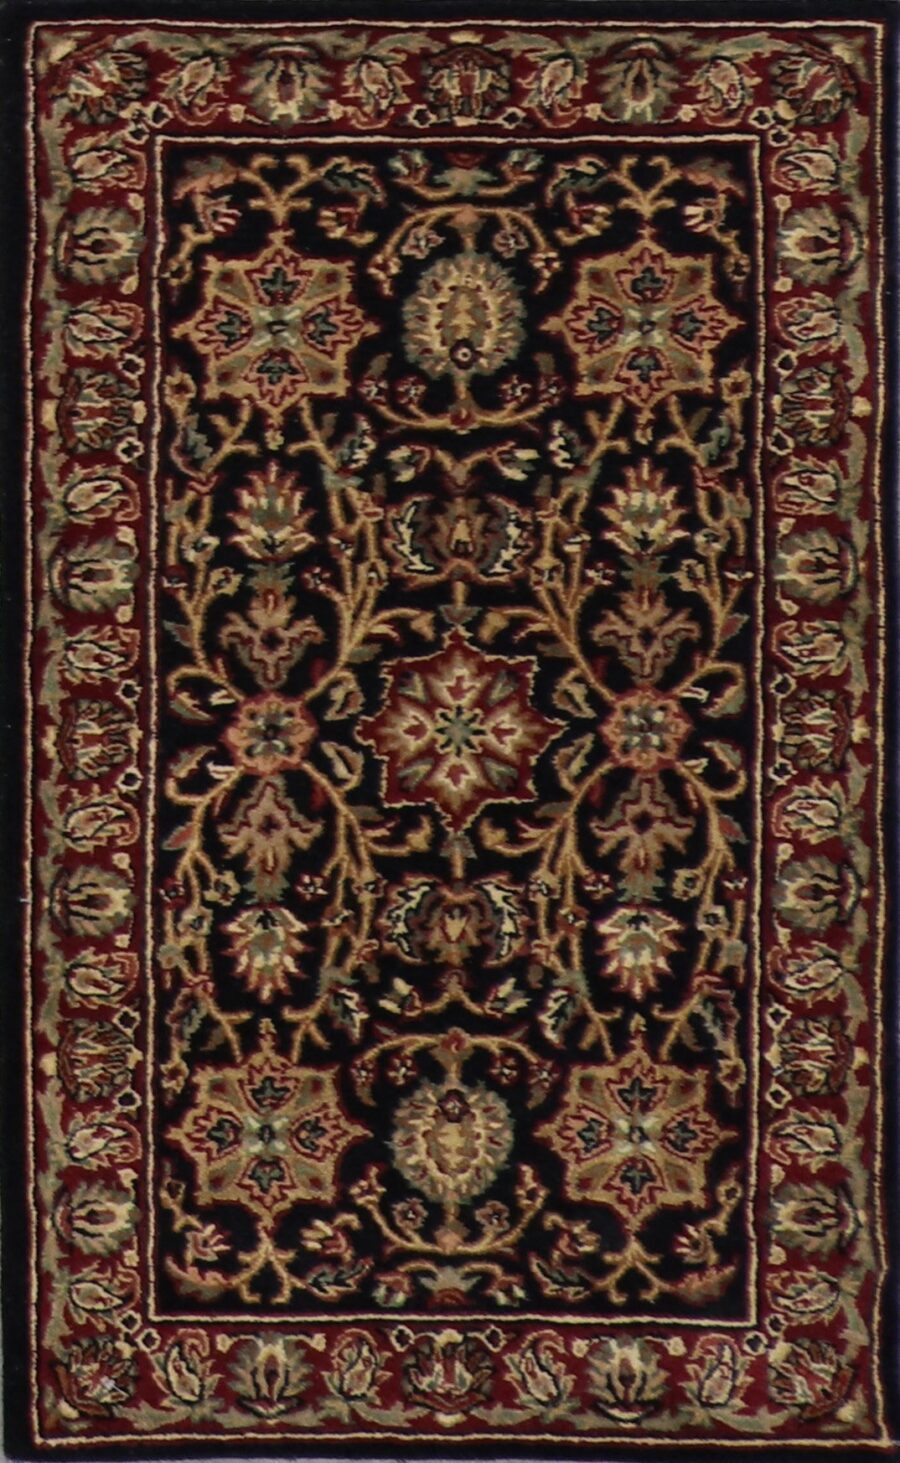 3’x5’ Traditional Black Wool Hand-Tufted Rug - Direct Rug Import | Rugs in Chicago, Indiana,South Bend,Granger